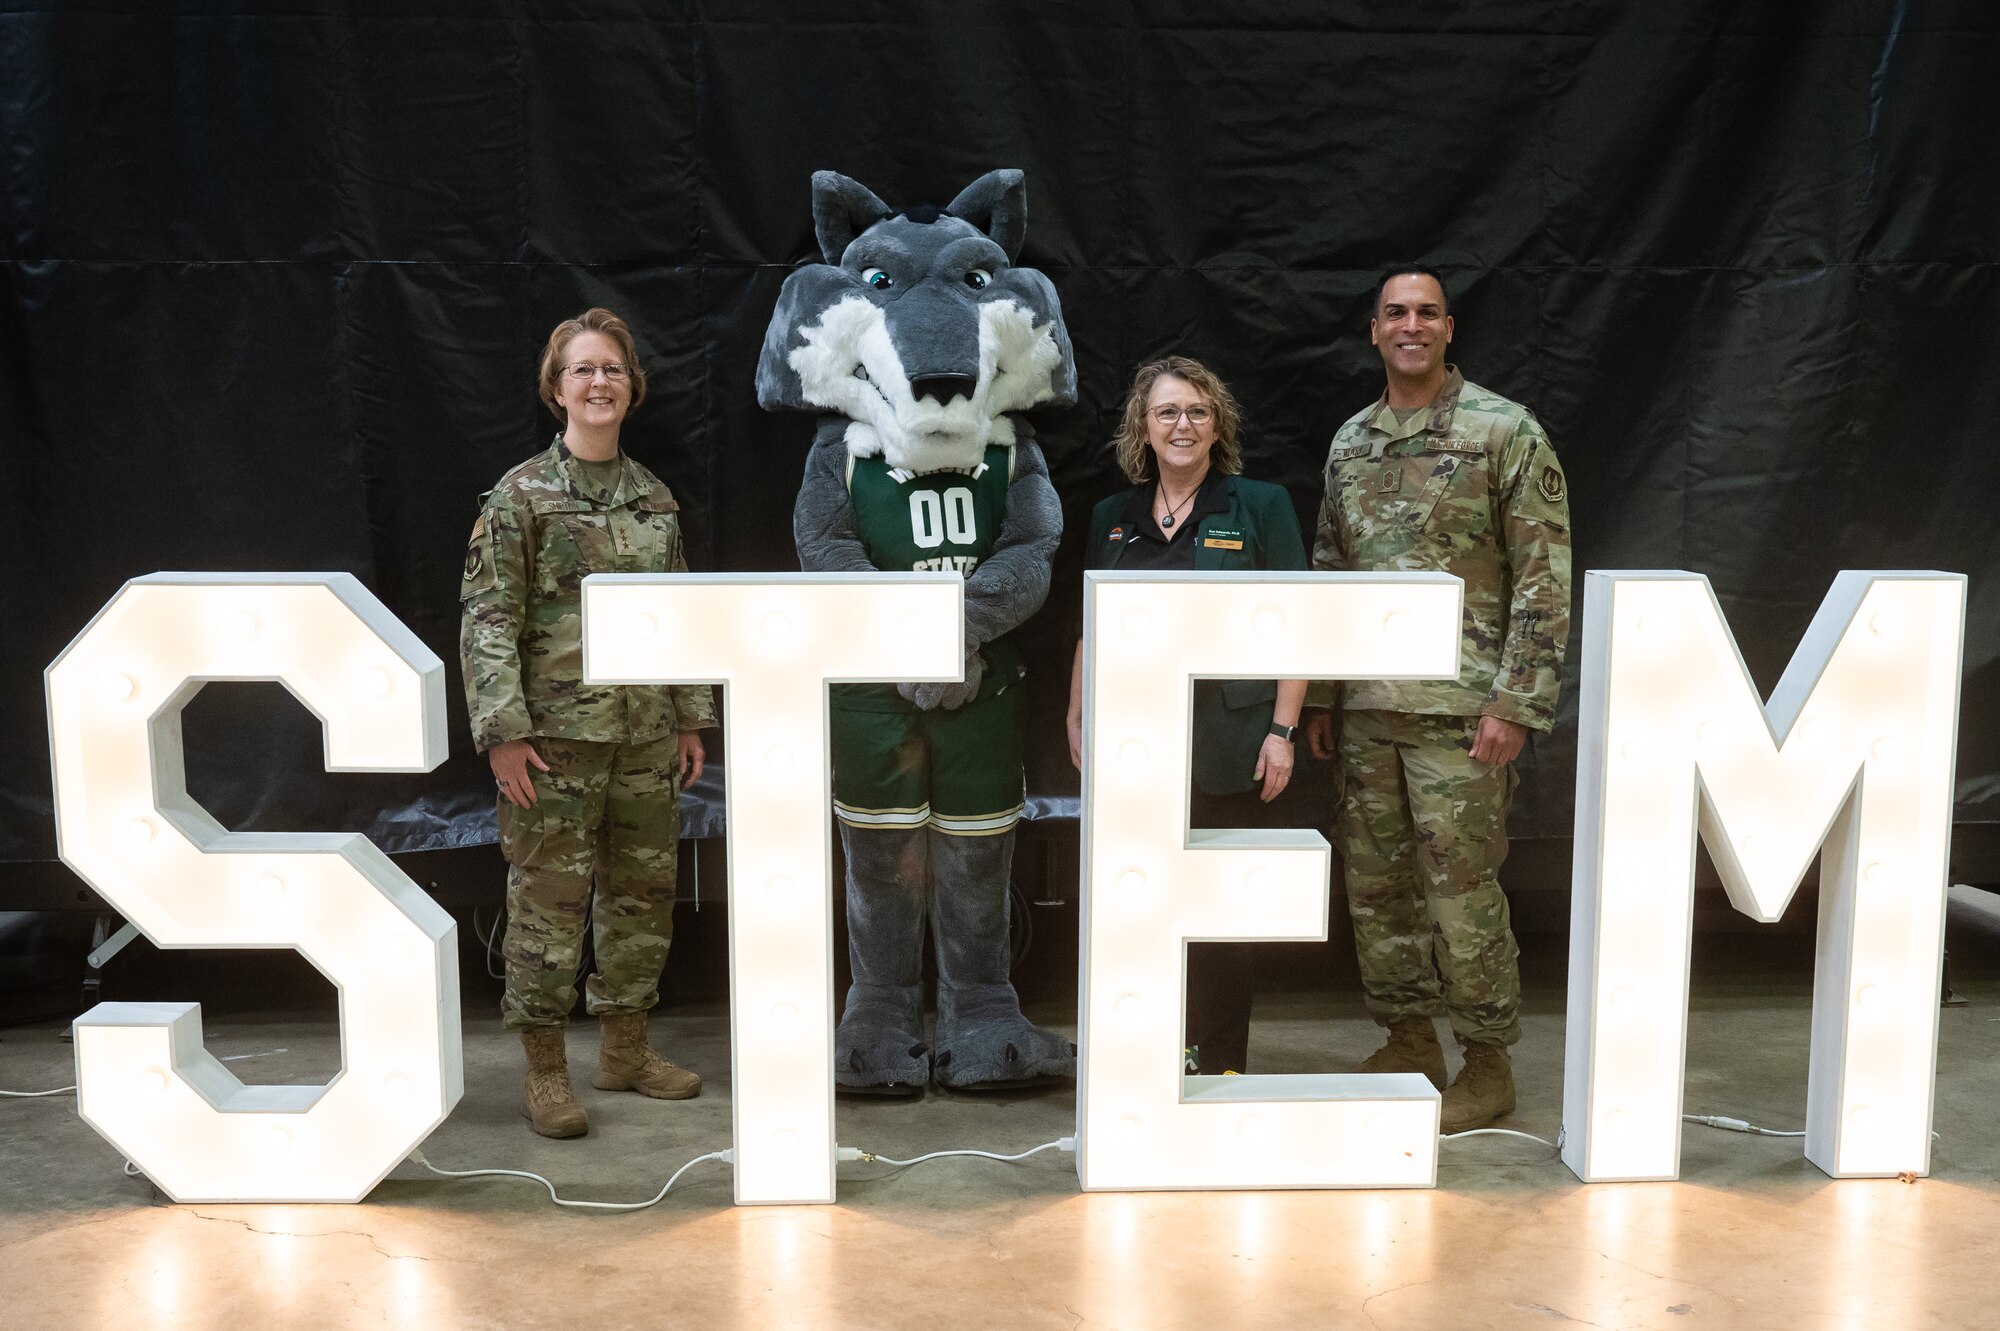 Three adults and WSU mascot stand beside STEM sign.